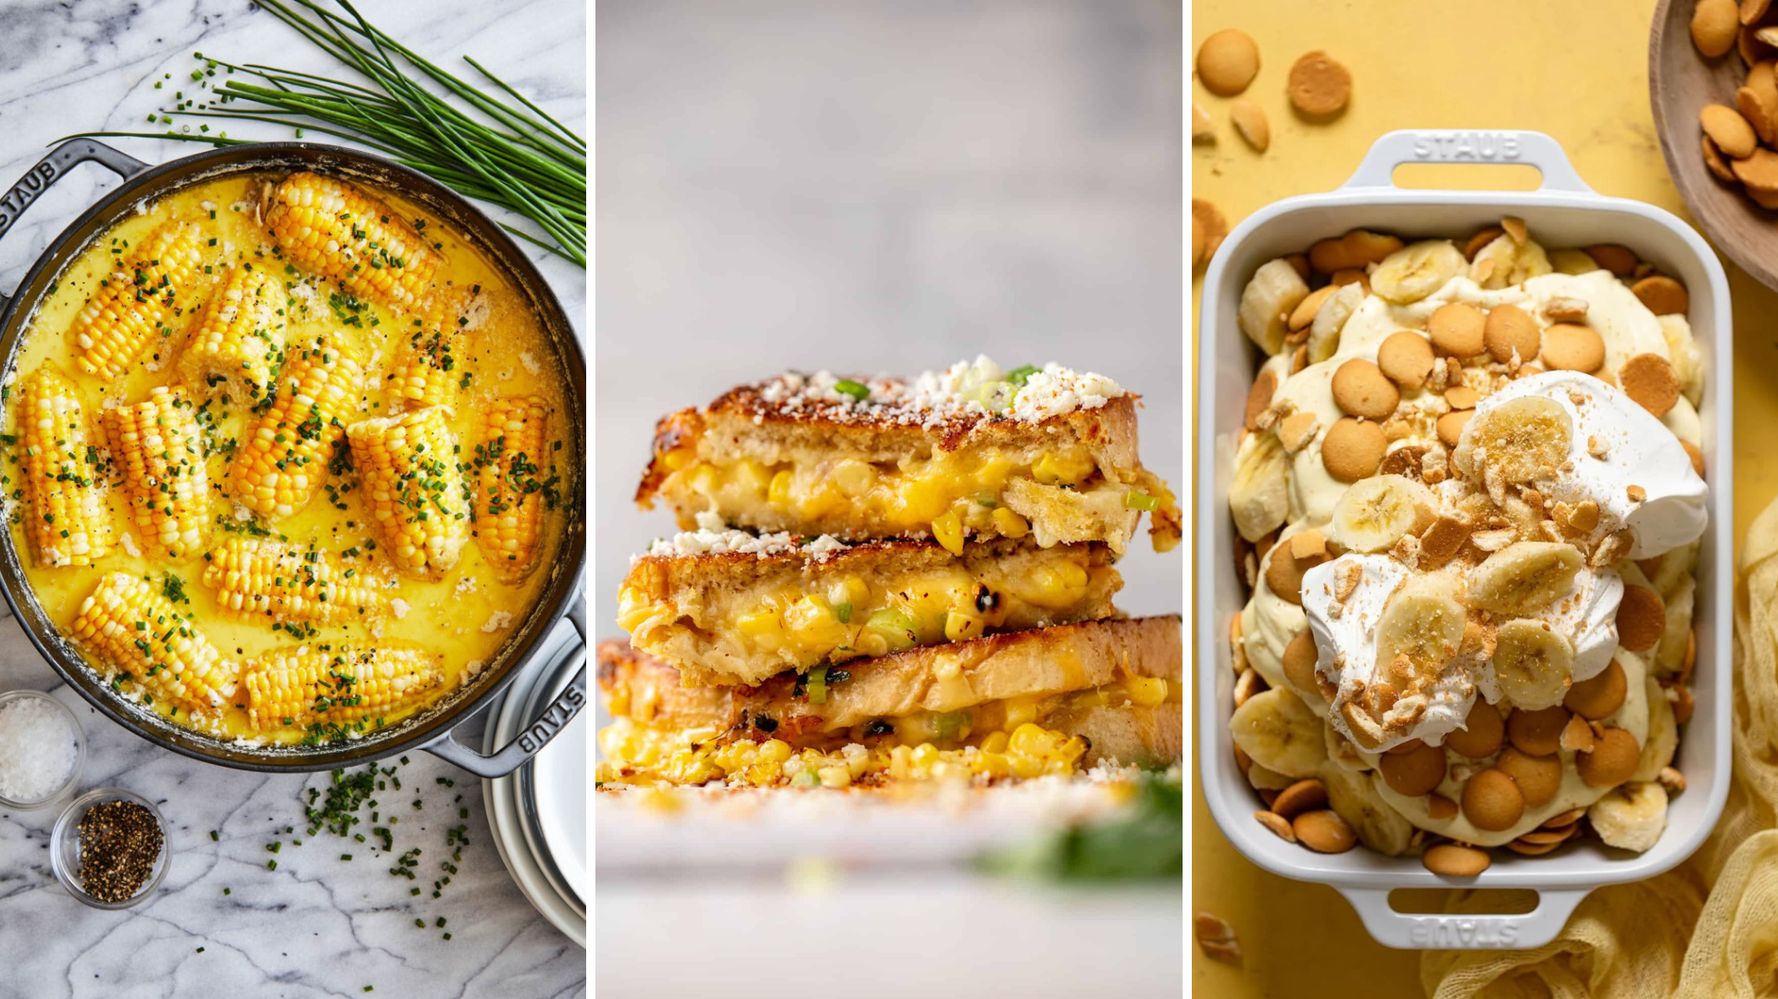 The 10 Best Instagram Recipes From July 2022